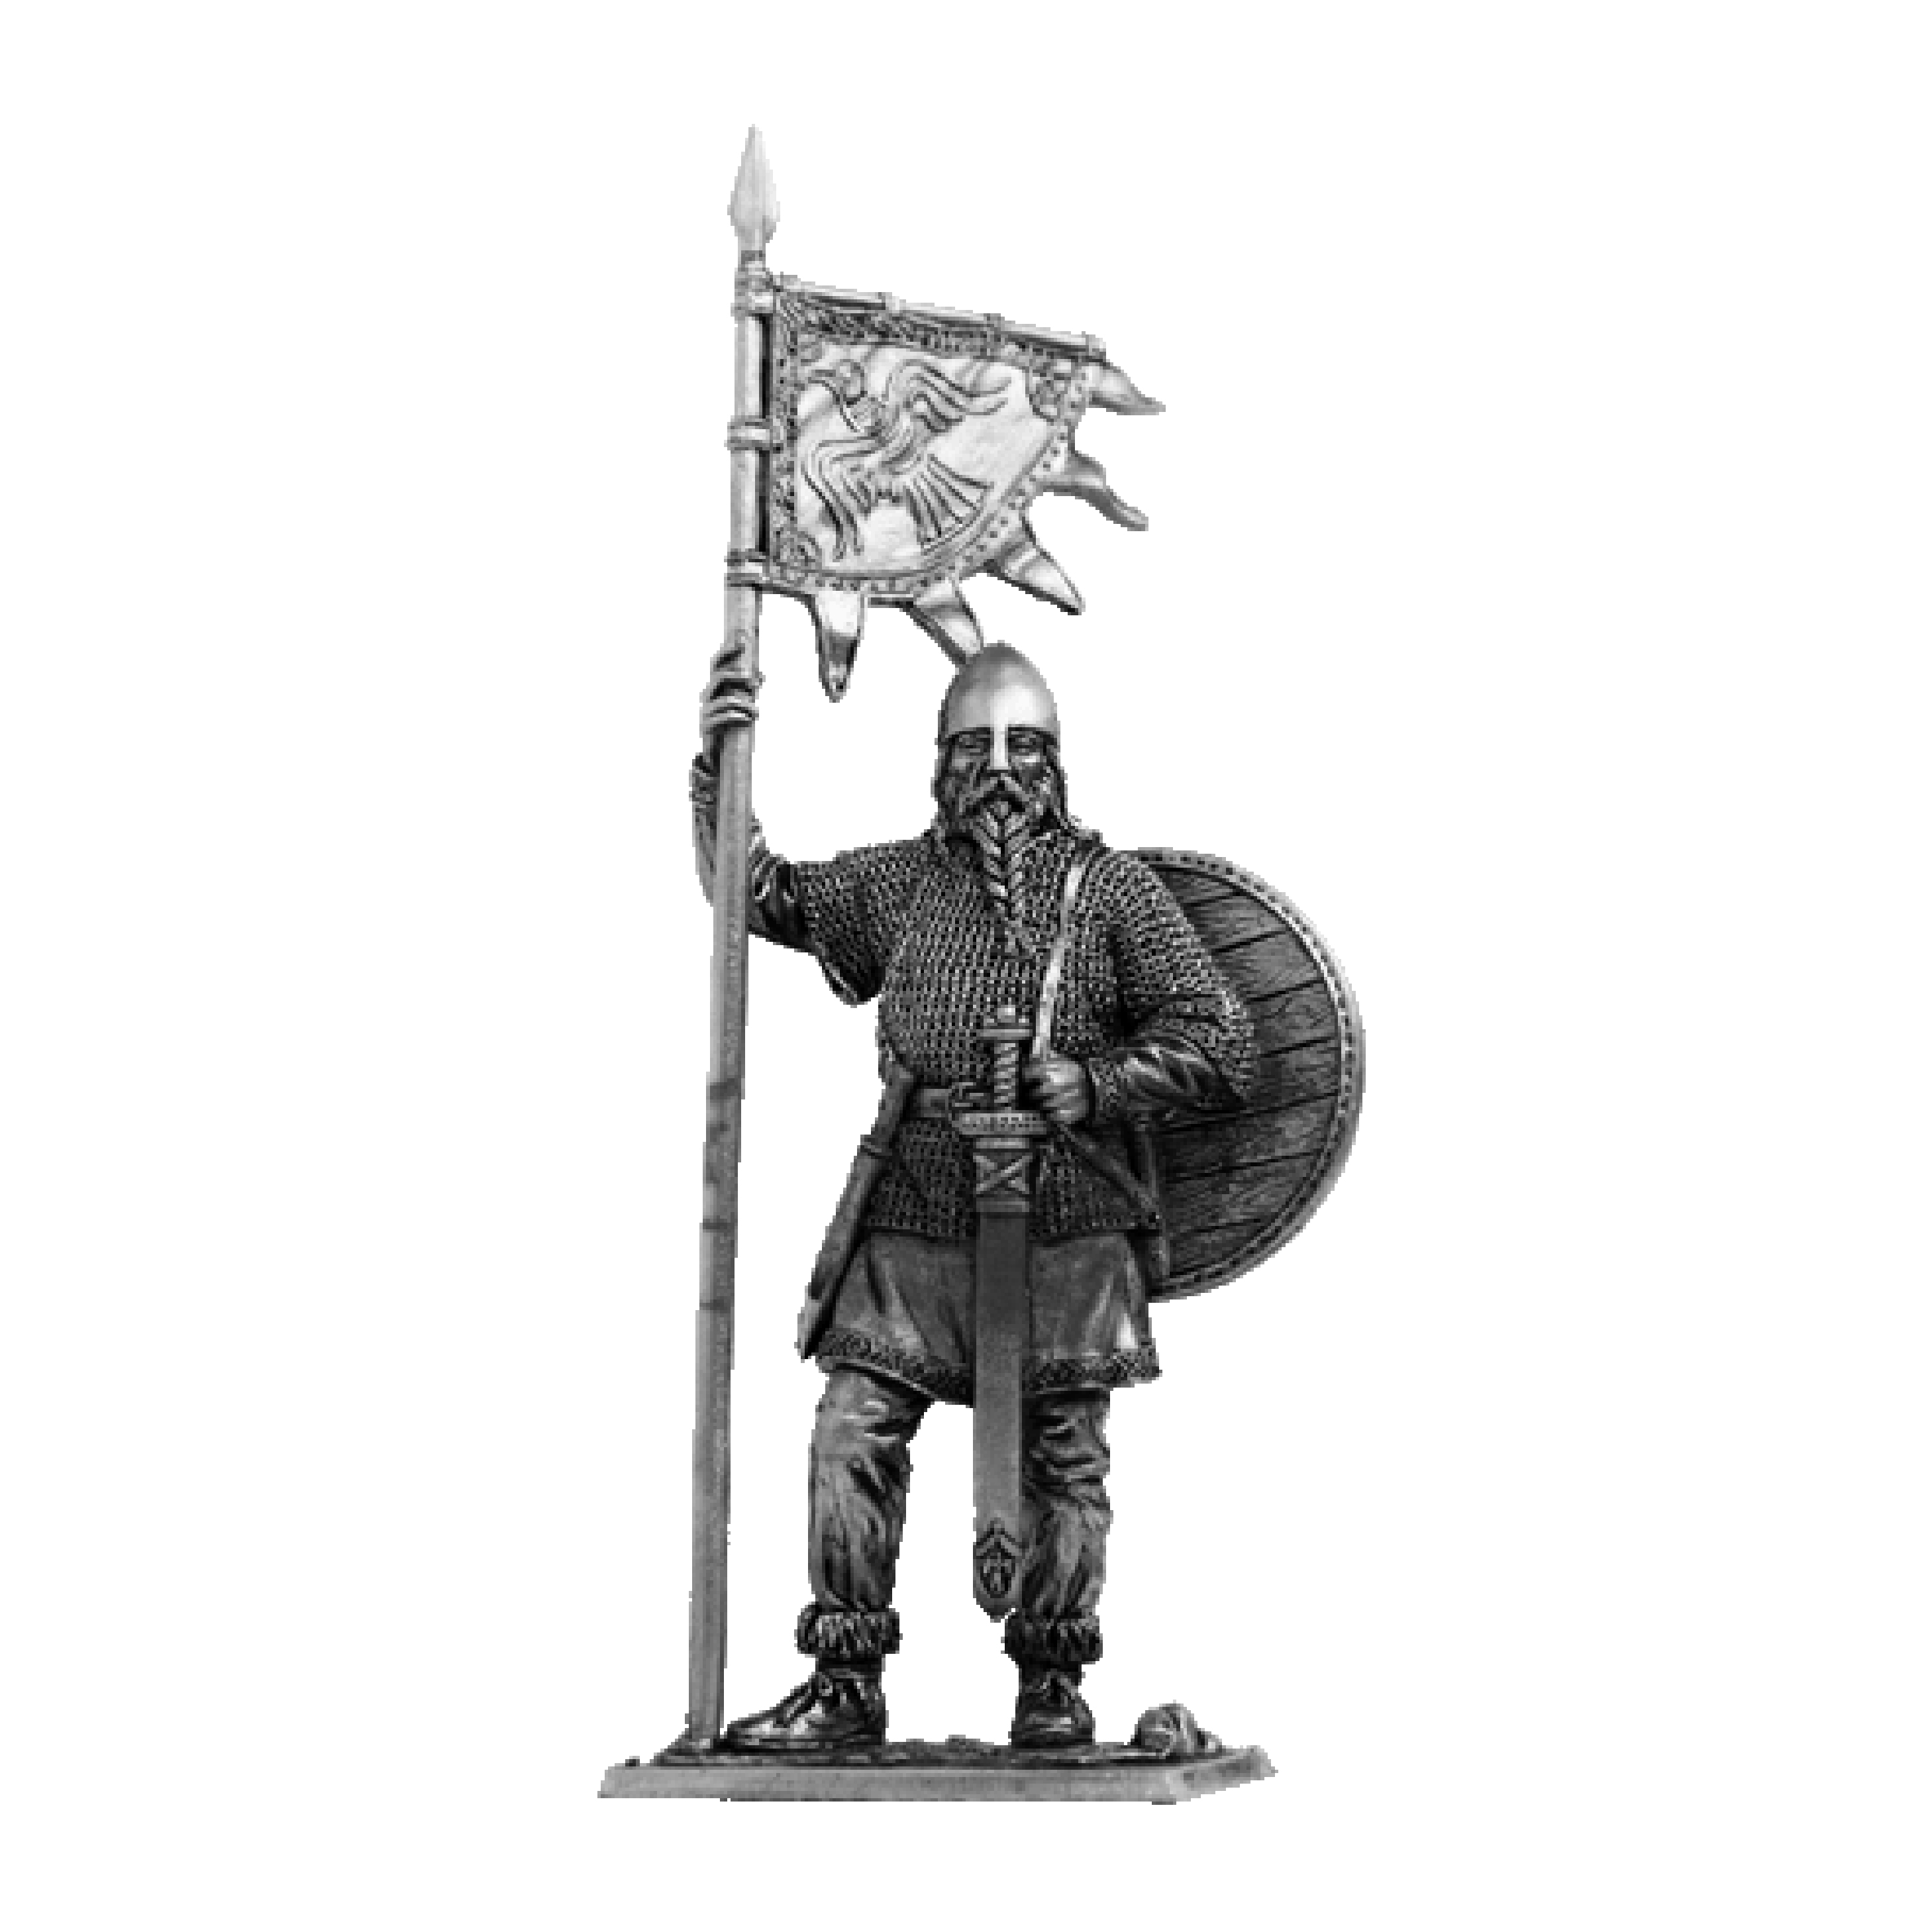 Viking with a banner, 9-10 centuries.